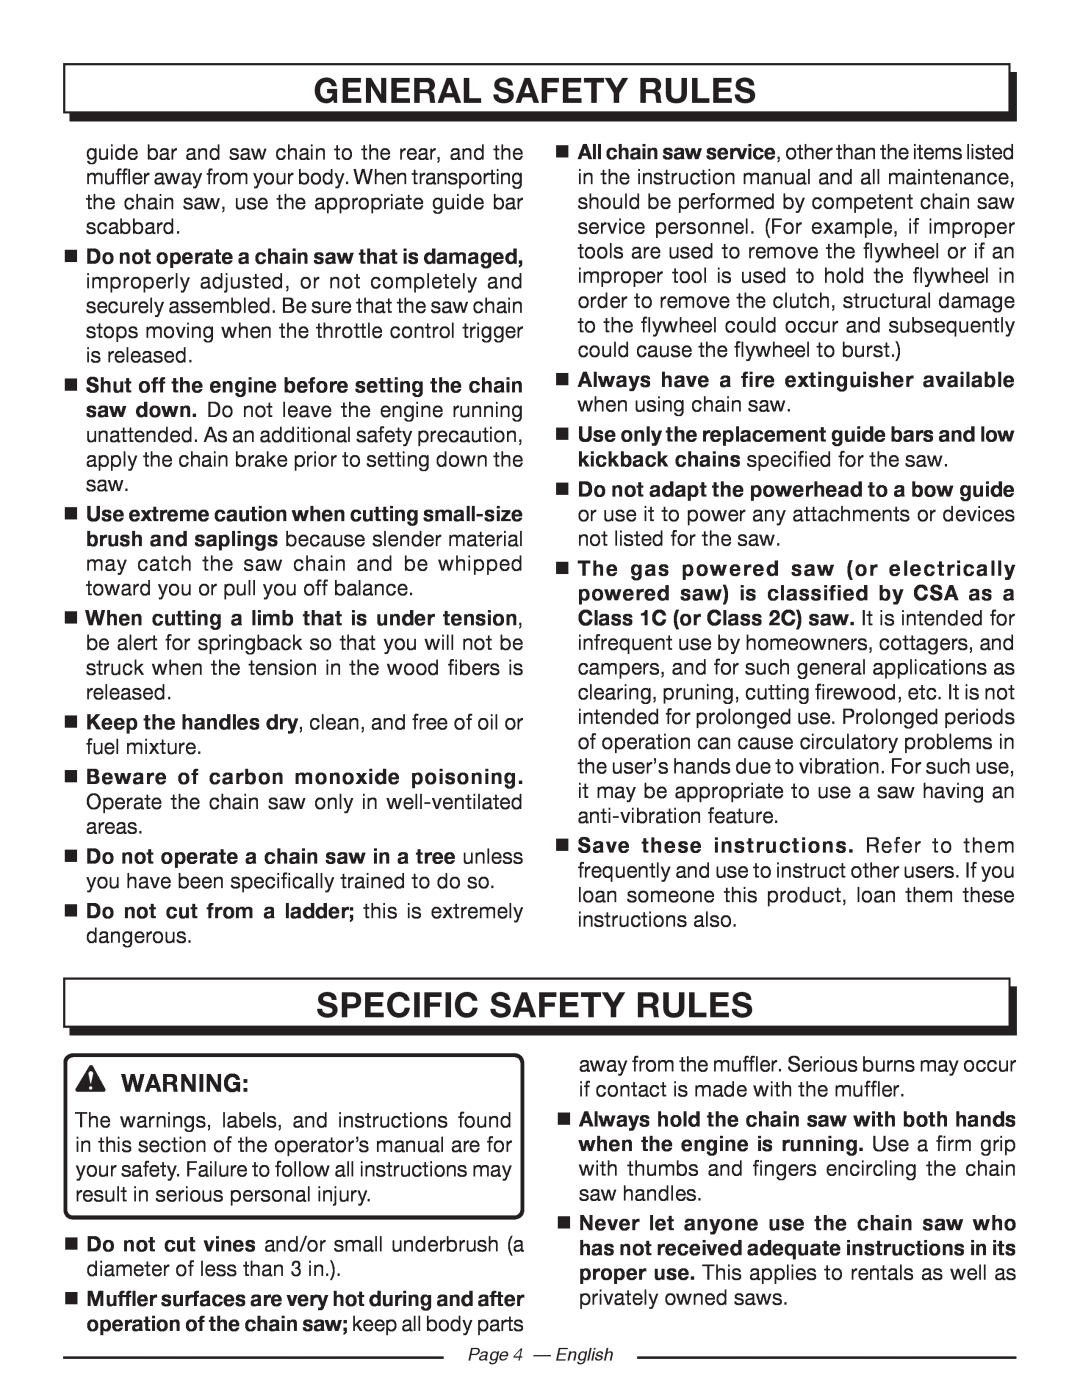 Homelite UT10560, UT10918, UT10585 specific safety rules, general safety rules, Do not adapt the powerhead to a bow guide 